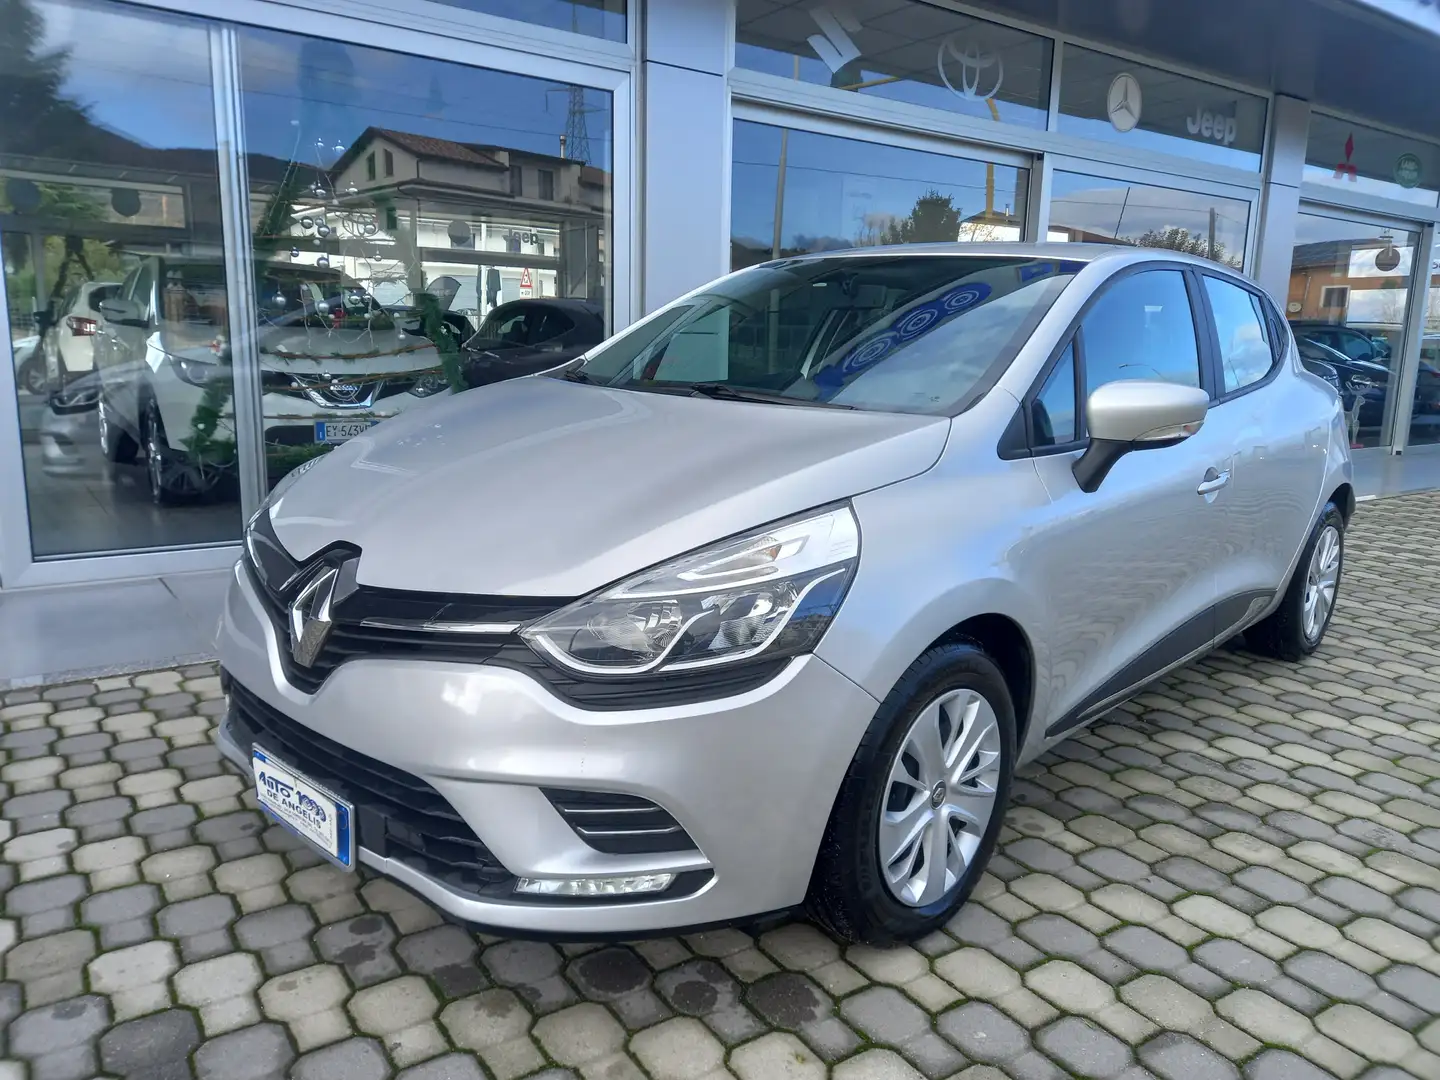 Renault Clio RESTYLING 1.5 dCi 75CV 5P *EURO 6B* FULL OPTIONALS Argent - 2